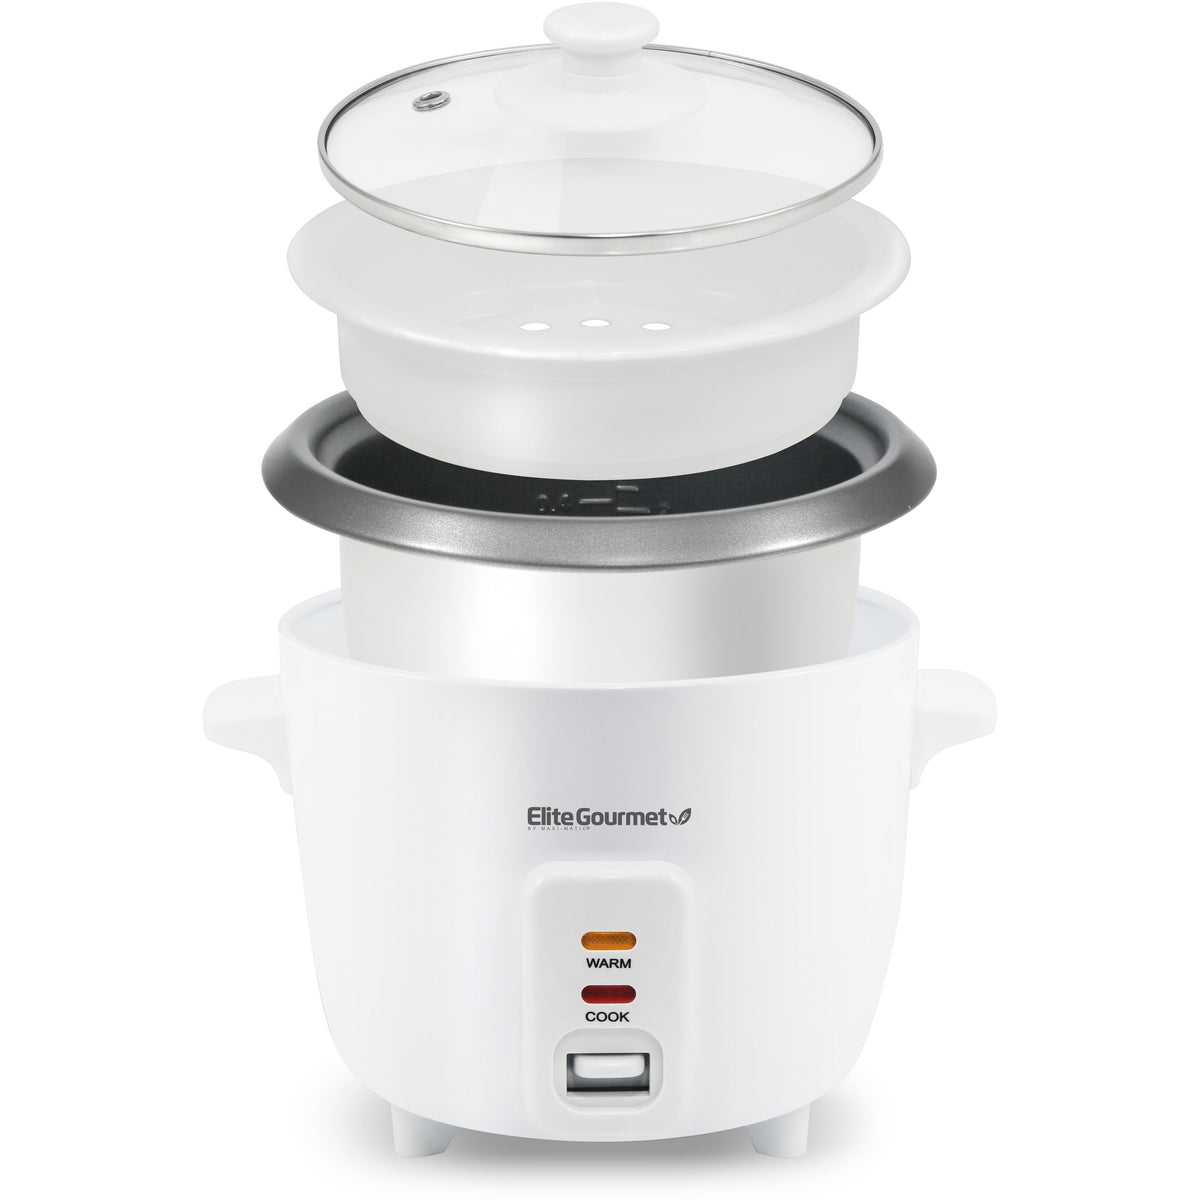 Elite Gourmet Erc-010st 10-cup Rice Cooker for sale online